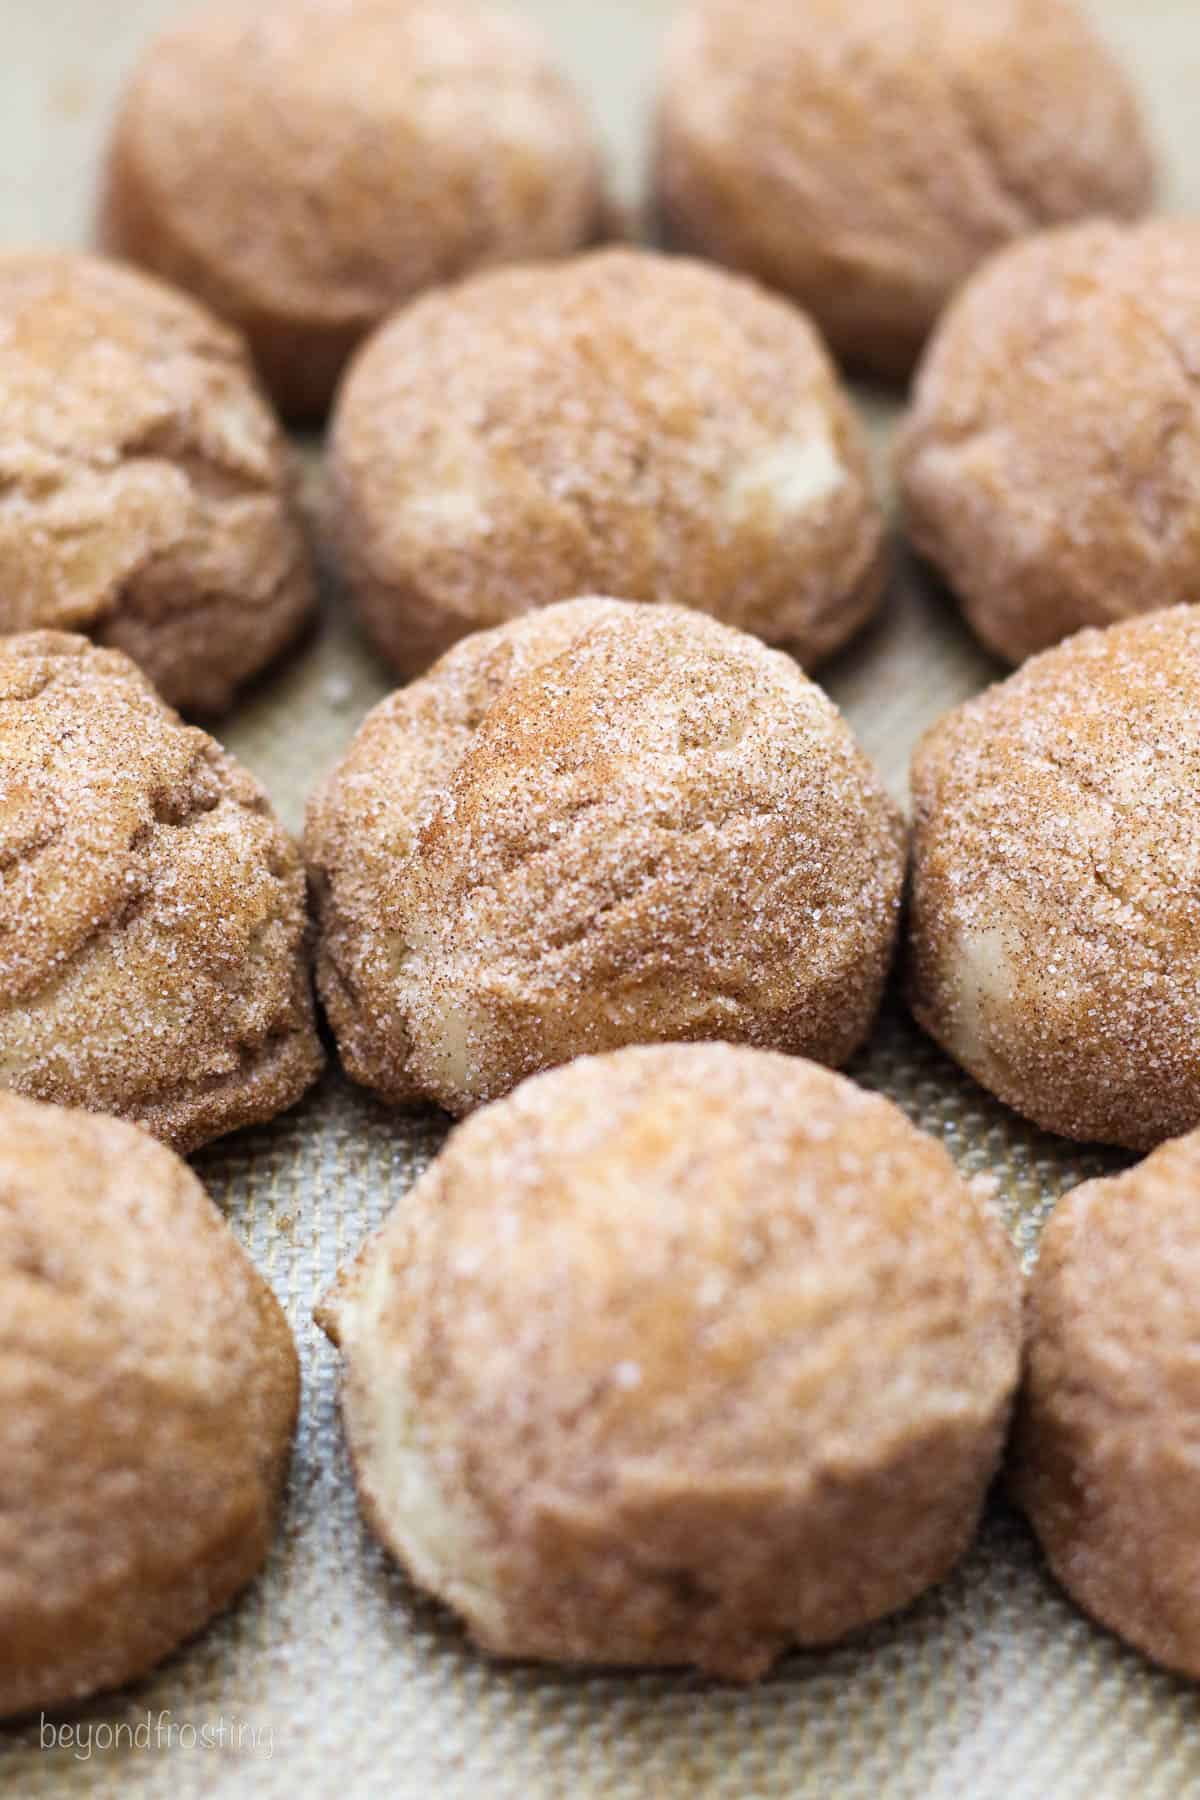 Rows of unbaked brown butter snickerdoodle cookie dough balls rolled in cinnamon sugar.